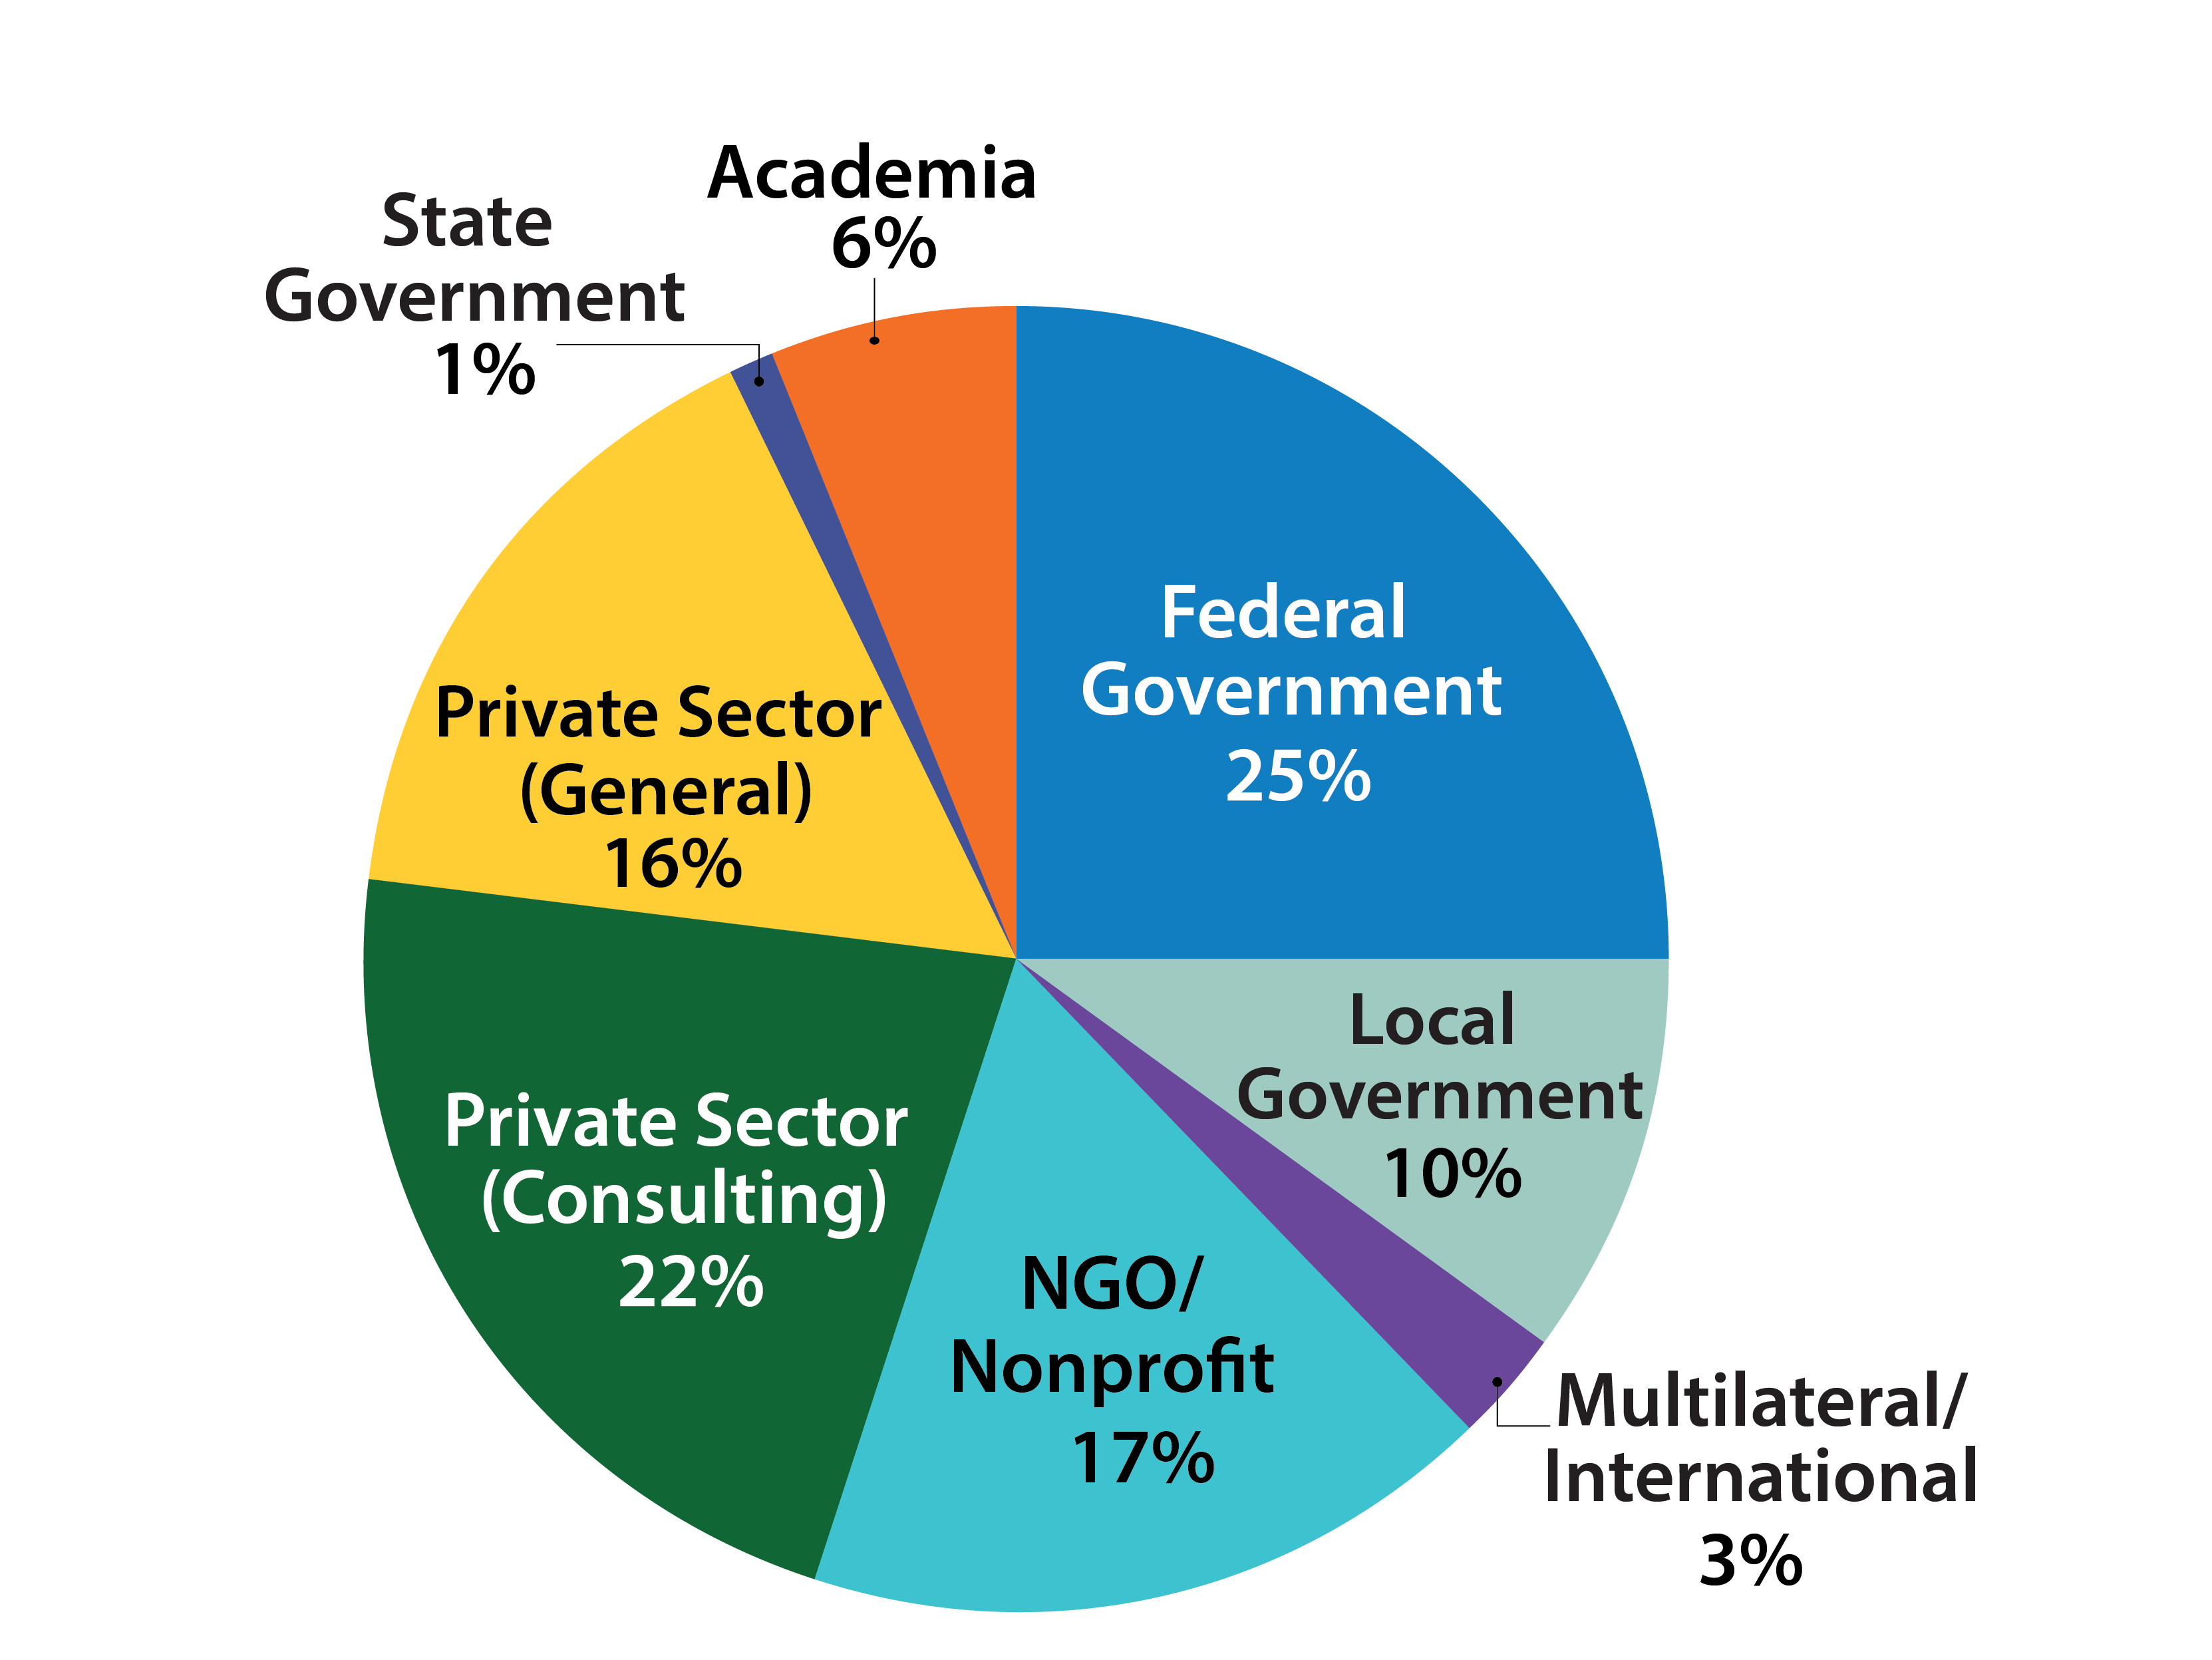 Pie Chart: Federal Government 25%, Local Government 10%, Multilateral/International 3%, NGO/Nonprofit 17%, Private Sector (Consulting) 22%, Private Sector (General) 16%, State Government 1%, Academia 6%